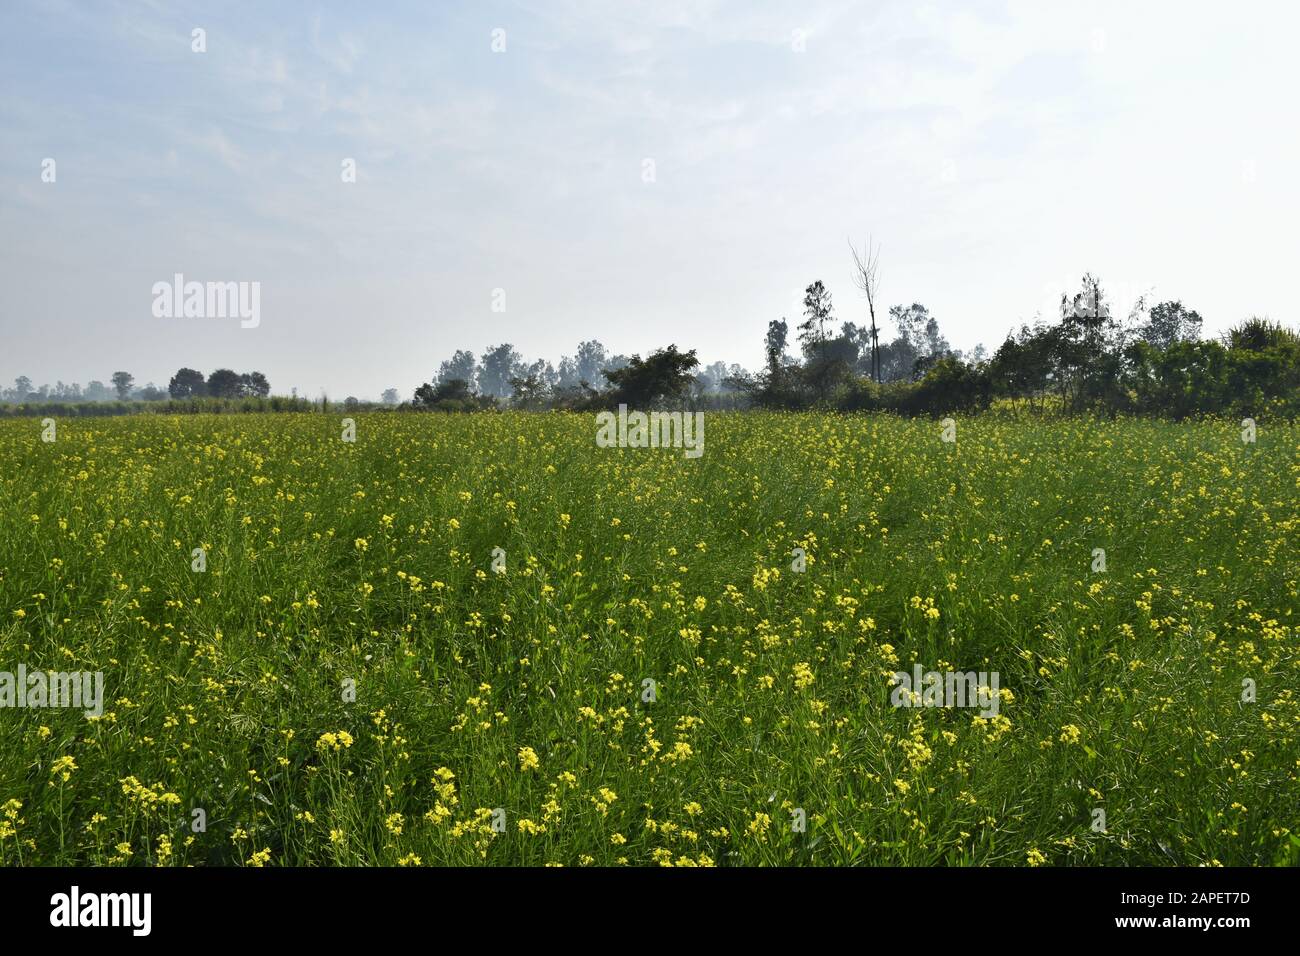 The mustard is a plant species in the genera Brassica. The plant age is more then one month and photo shoot at U.P. north India. Stock Photo